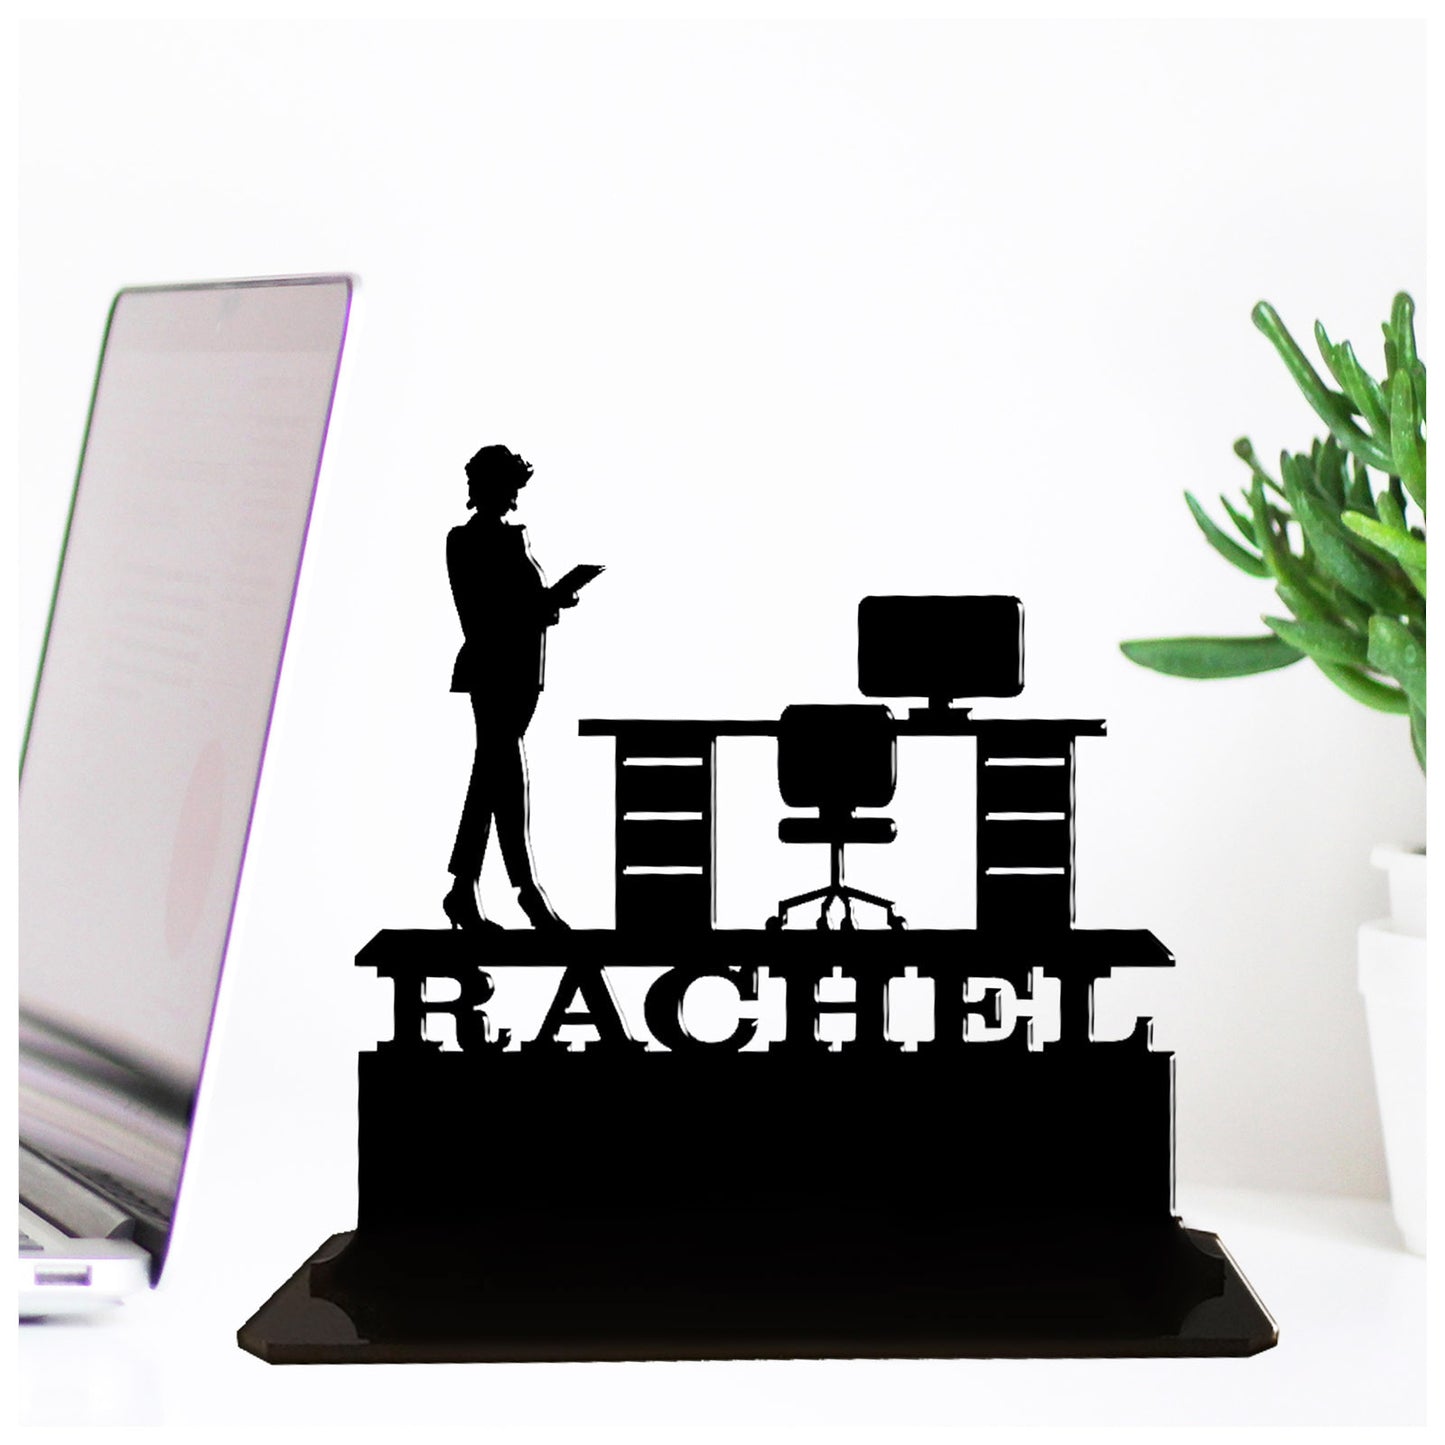 Acrylic personalised gift ideas for secretary and admin assistants. Standalone keepsake ornaments.